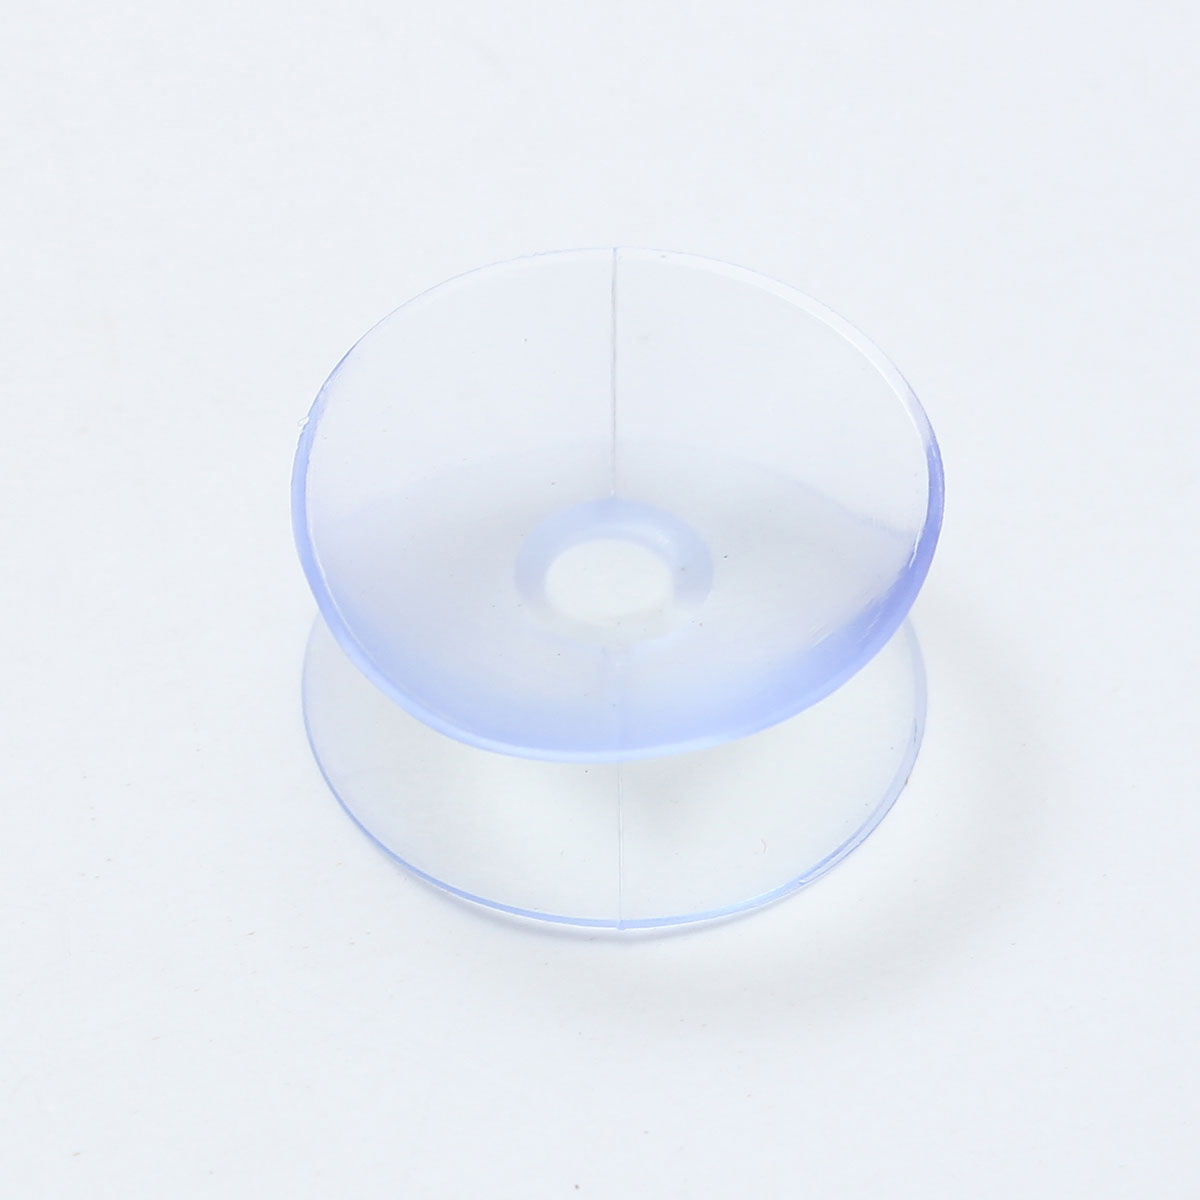 double sided suction cups menards